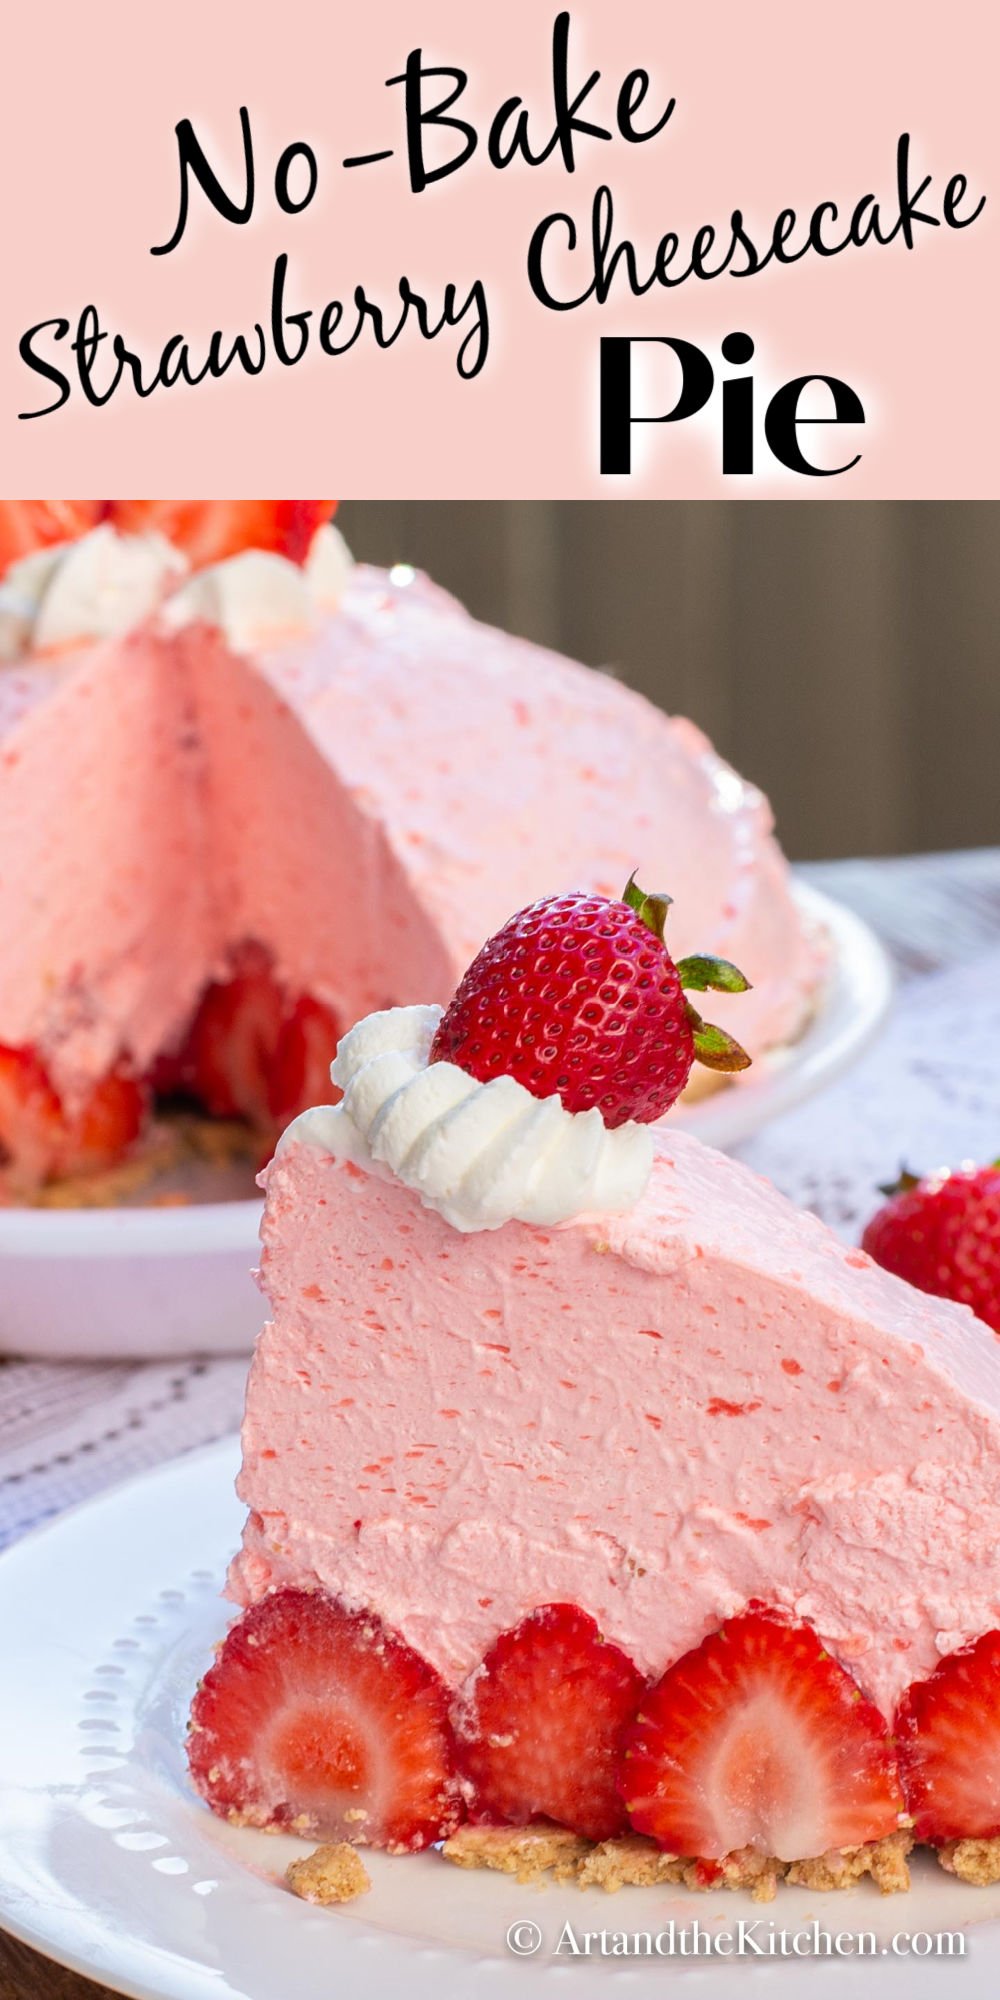 Creamy and fluffy, this No-Bake Strawberry Cheesecake Pie is a favorite summertime dessert. A graham cracker crust filled with fresh strawberries and a light strawberry cream cheese filling. via @artandthekitch